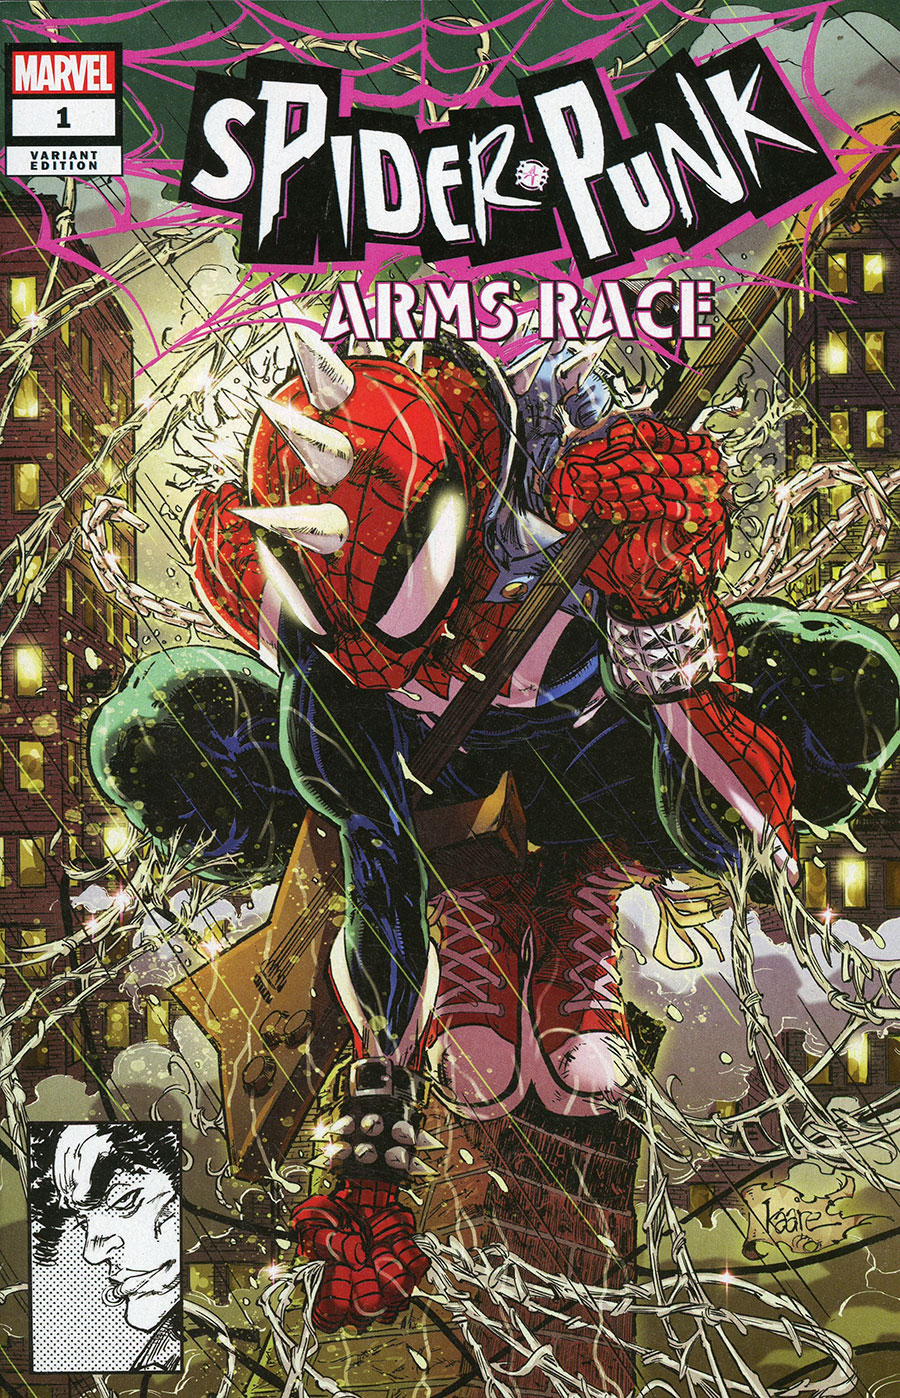 Spider-Punk Arms Race #1 Cover D Variant Kaare Andrews Cover (Limit 1 Per Customer)